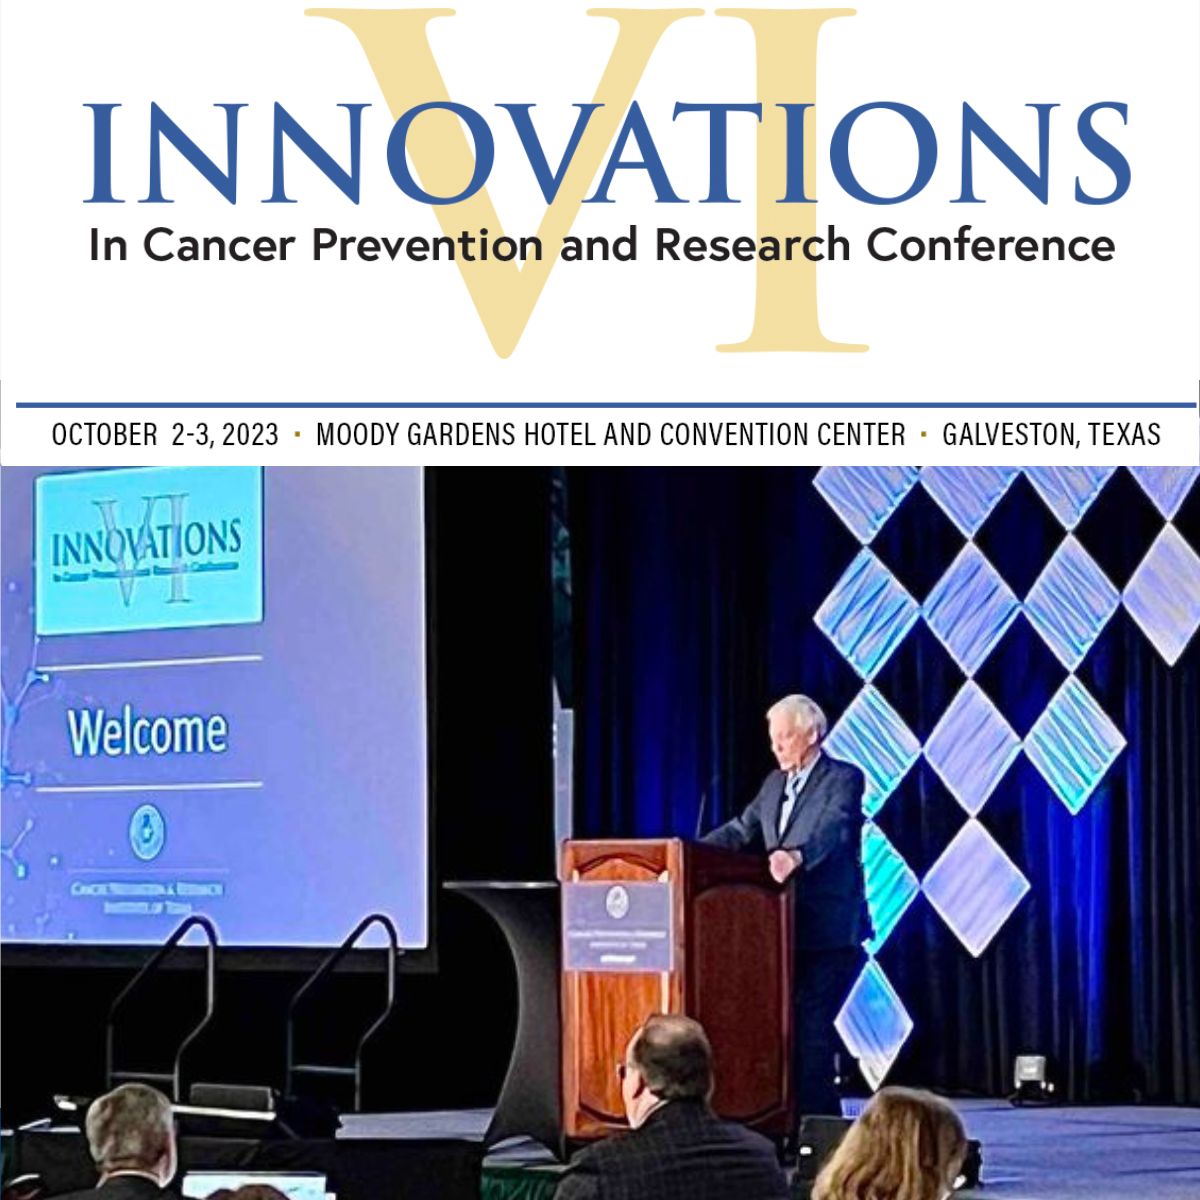 Finishing up the 1st year of our #CPRIT grant: informai.com/post/informai-…

We attended our first annual conference, CPRIT Innovations VI, in Galveston this week. The conference program is online for those interested: ow.ly/R4mV50PRW9B

#CPRITInnovations #TexasCancerConference